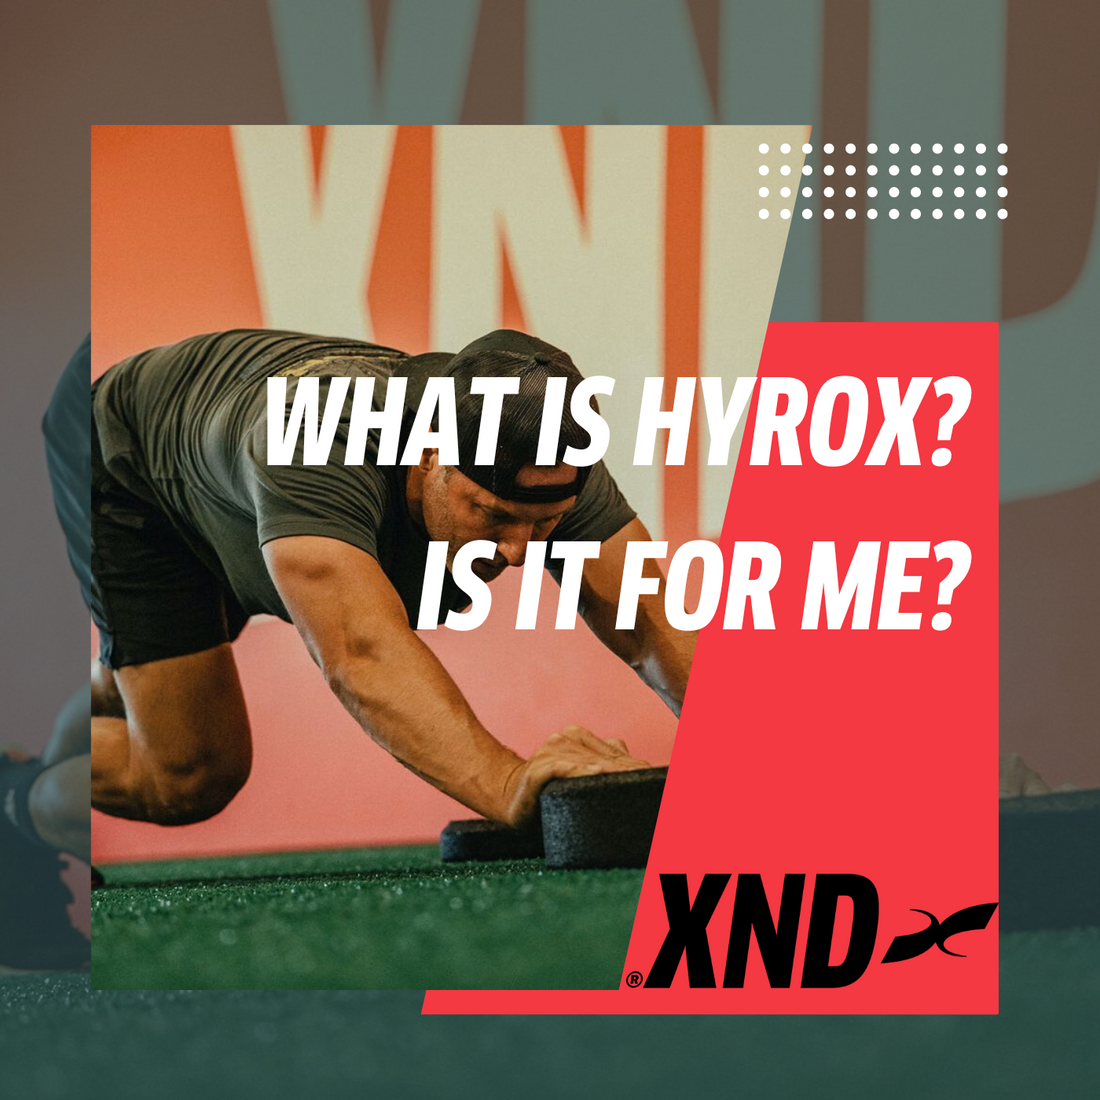 What is Hyrox? Is it for me?